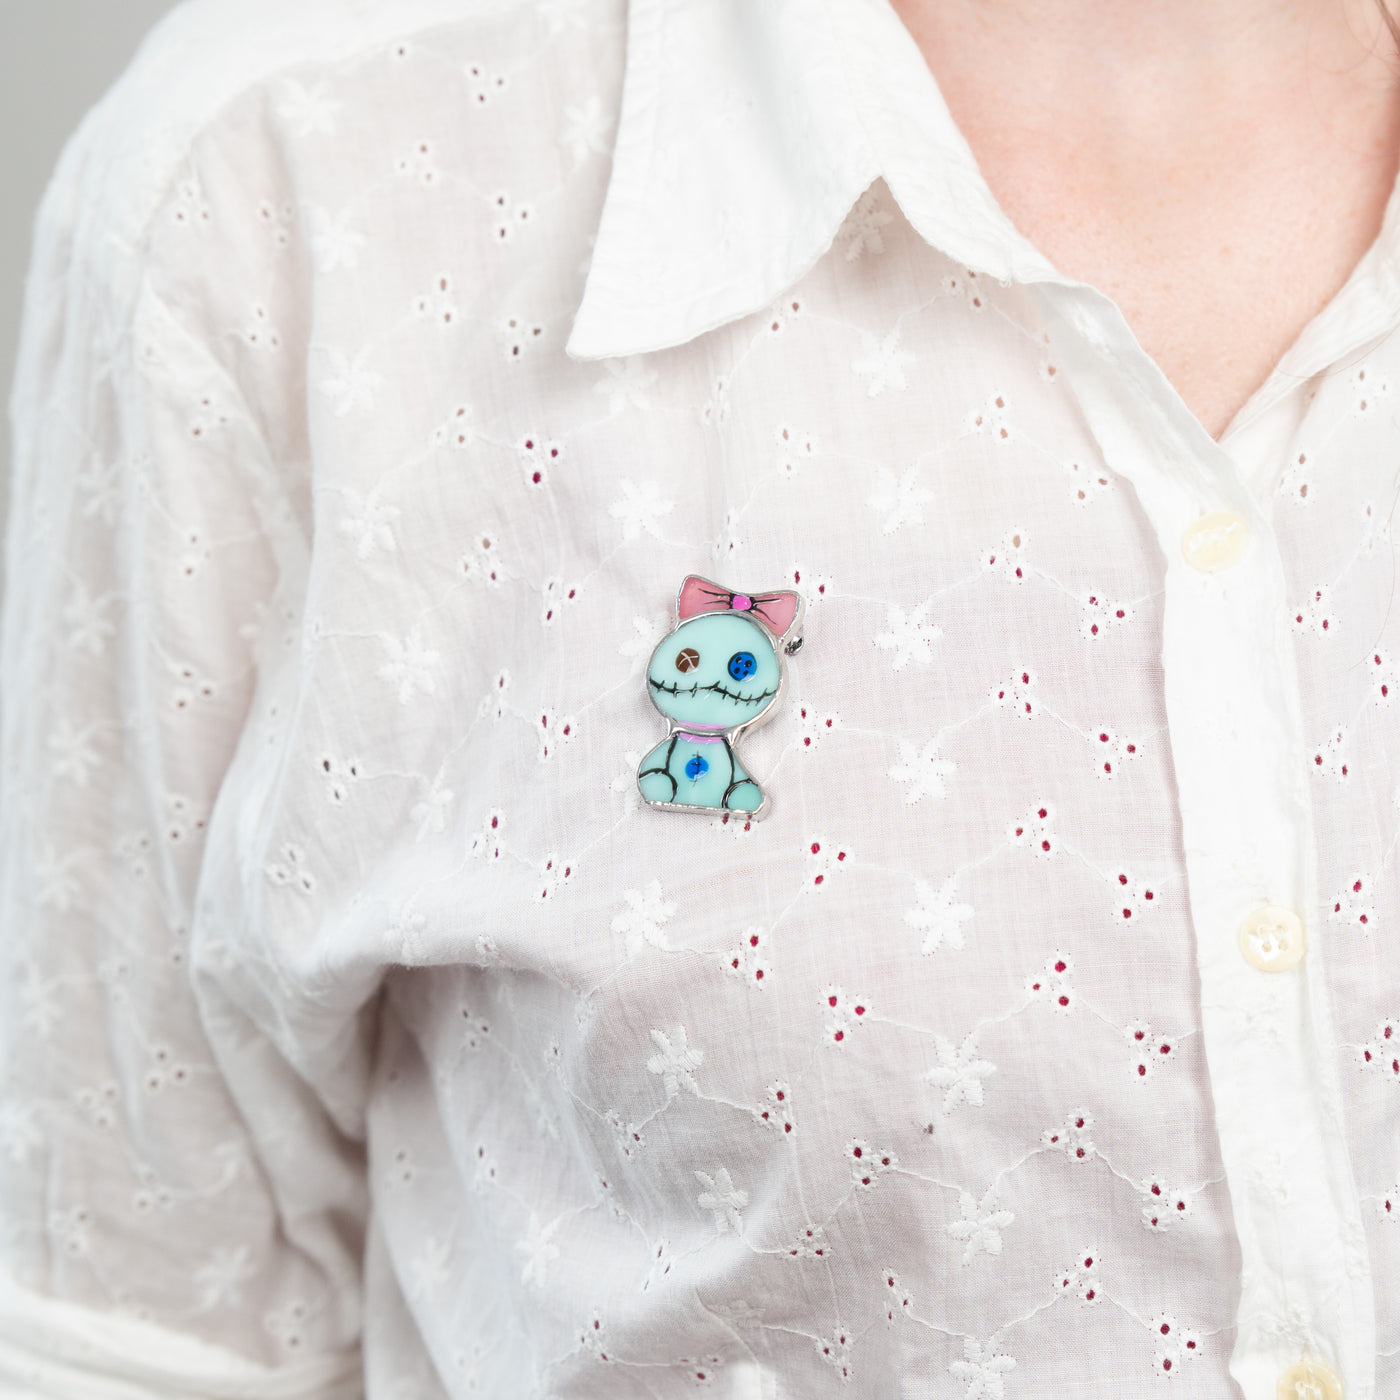 Stained glass turquoise toy with pink bow brooch on a white shirt